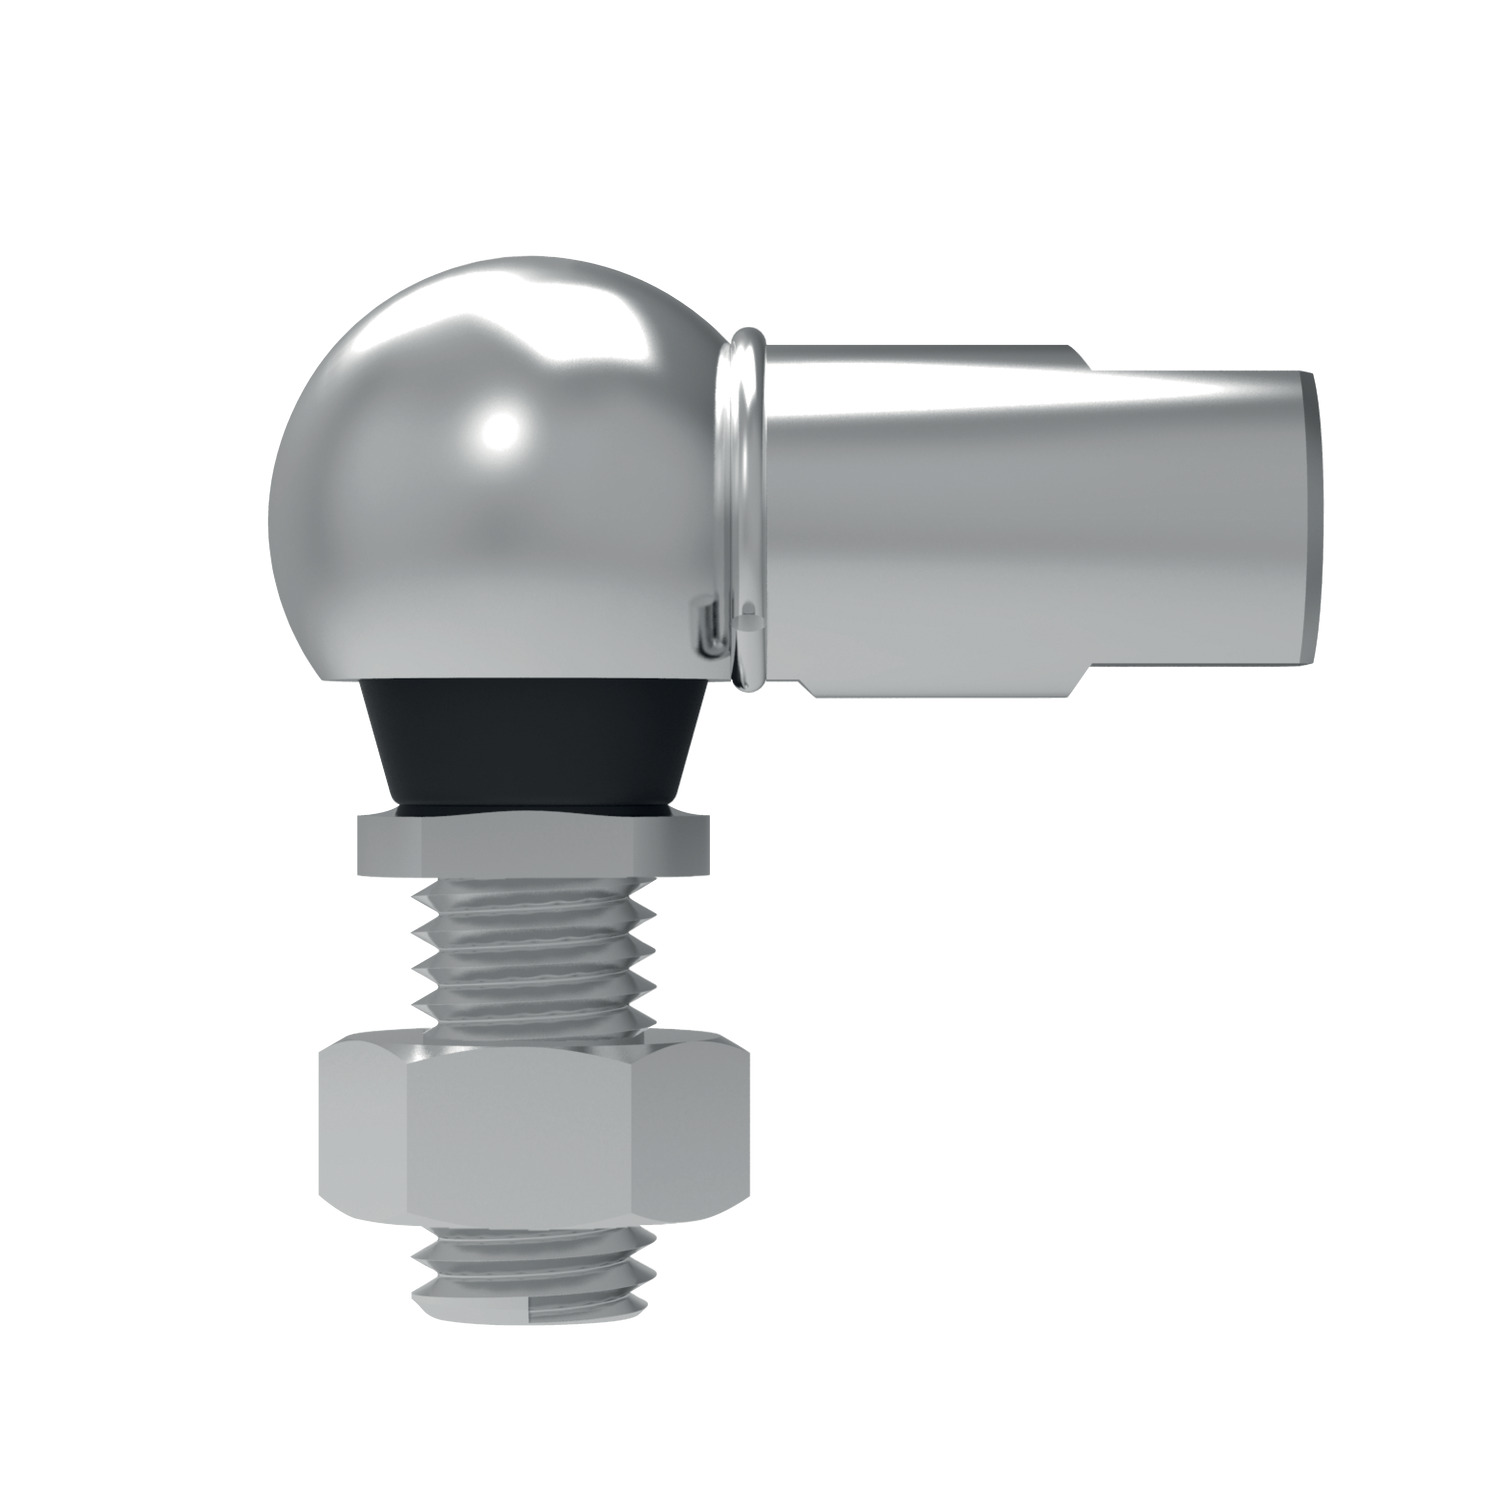 Stainless Ball and Socket Joint Stainless steel Ball and socket joints with spanner flats on female housing allowing for easier installation. Also with protective gaitor.